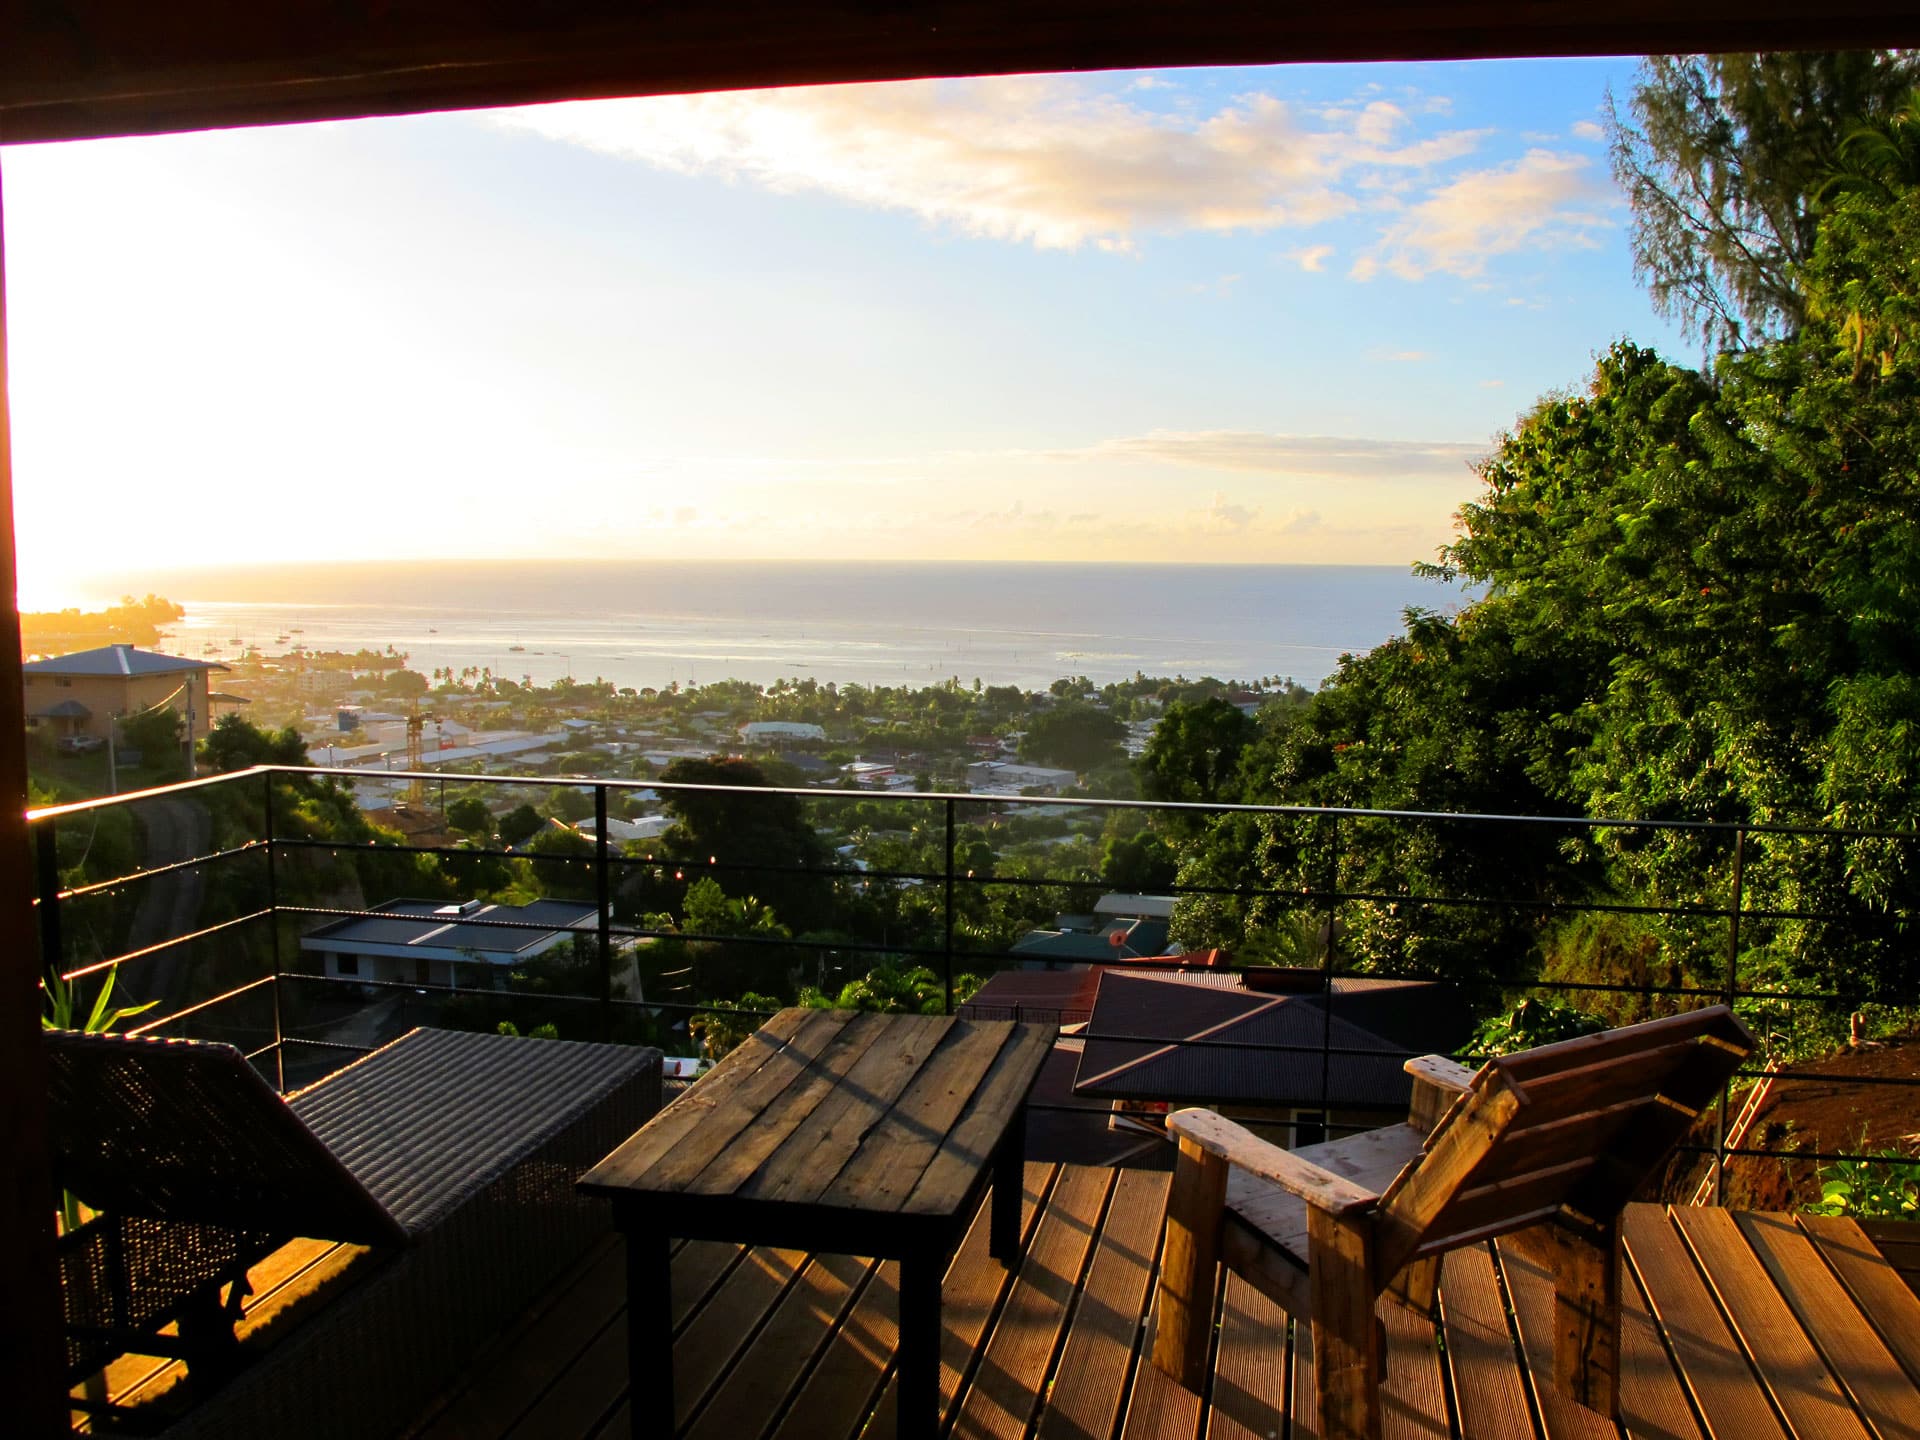 View of the ocean from the wooden terrace of the Aito bungalow